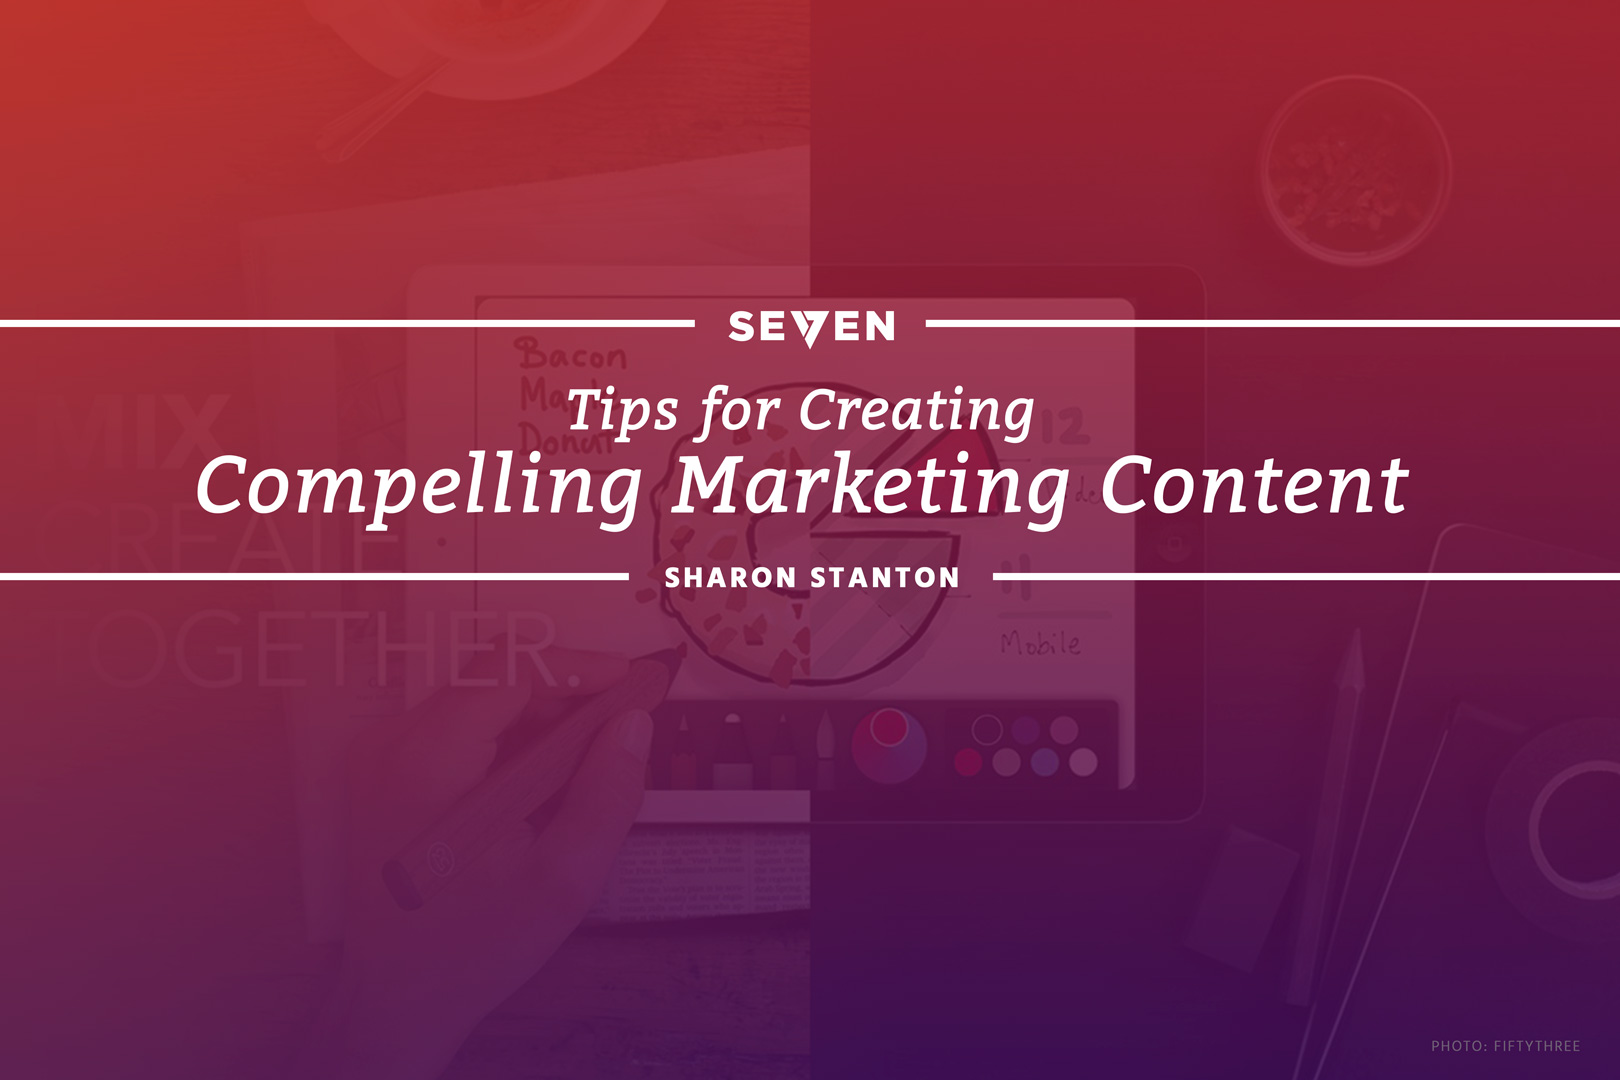 Tips for Creating Compelling Marketing Content